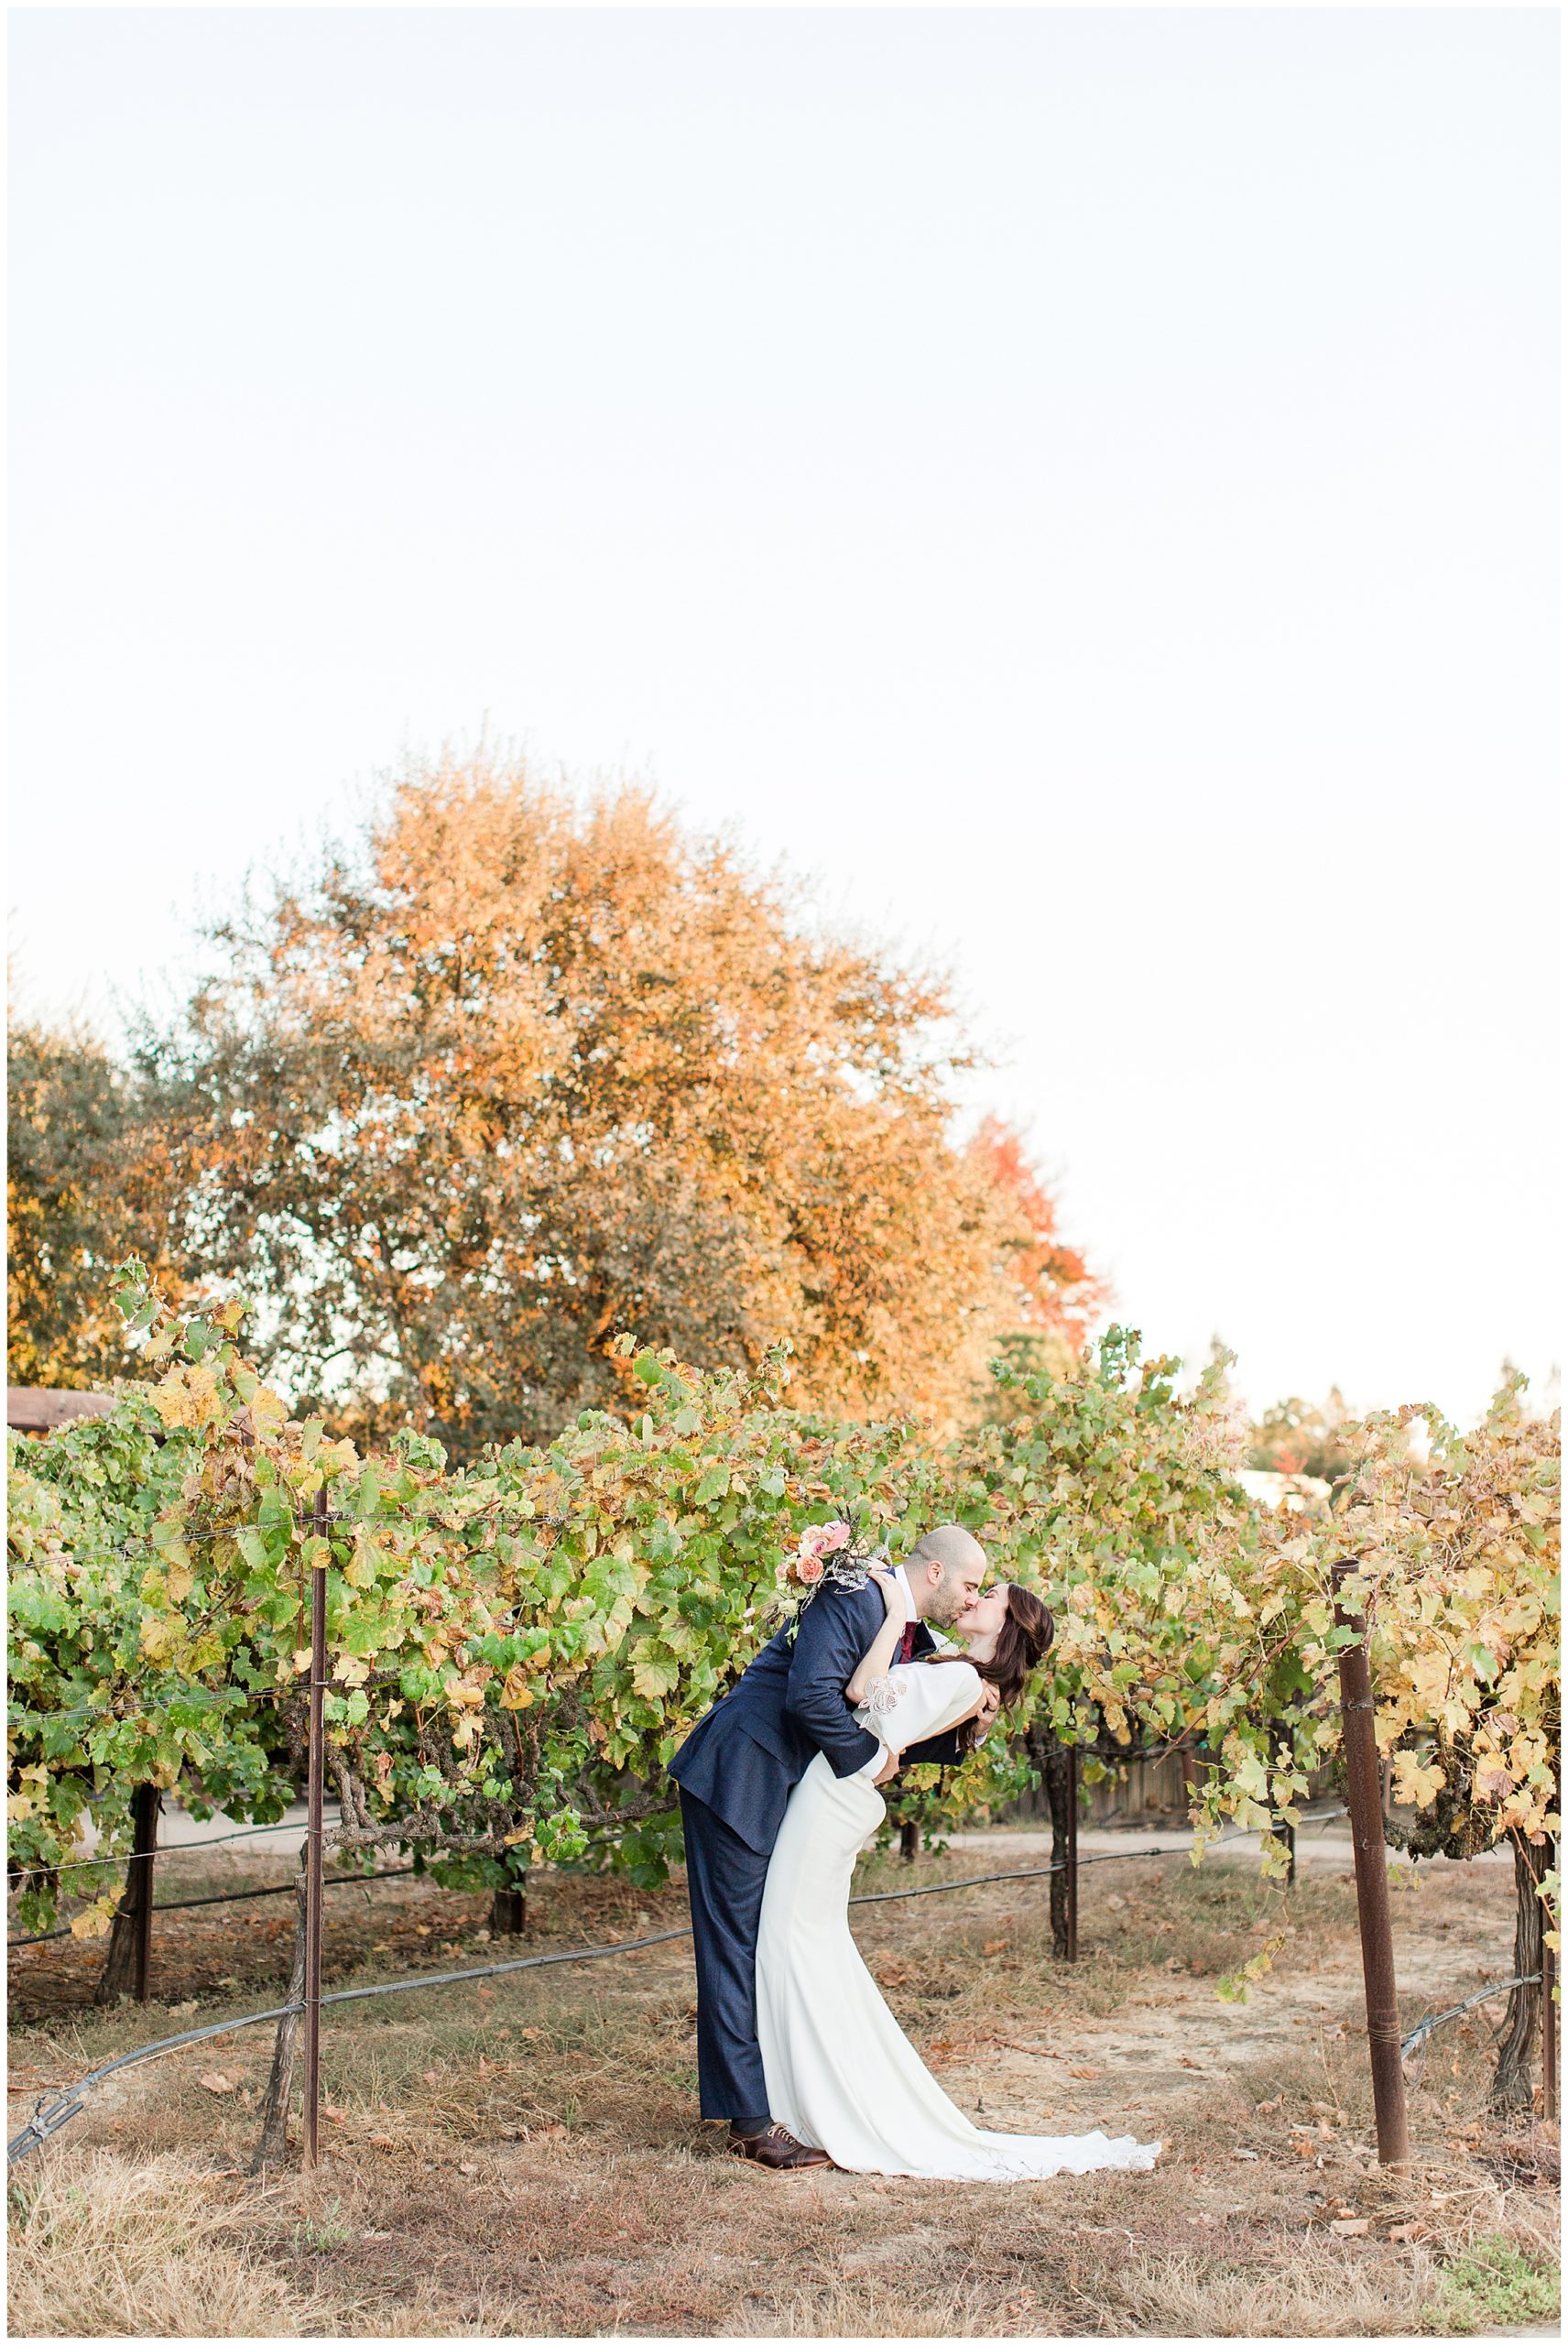 Top Wedding Venues | Northern California | Wine and Roses